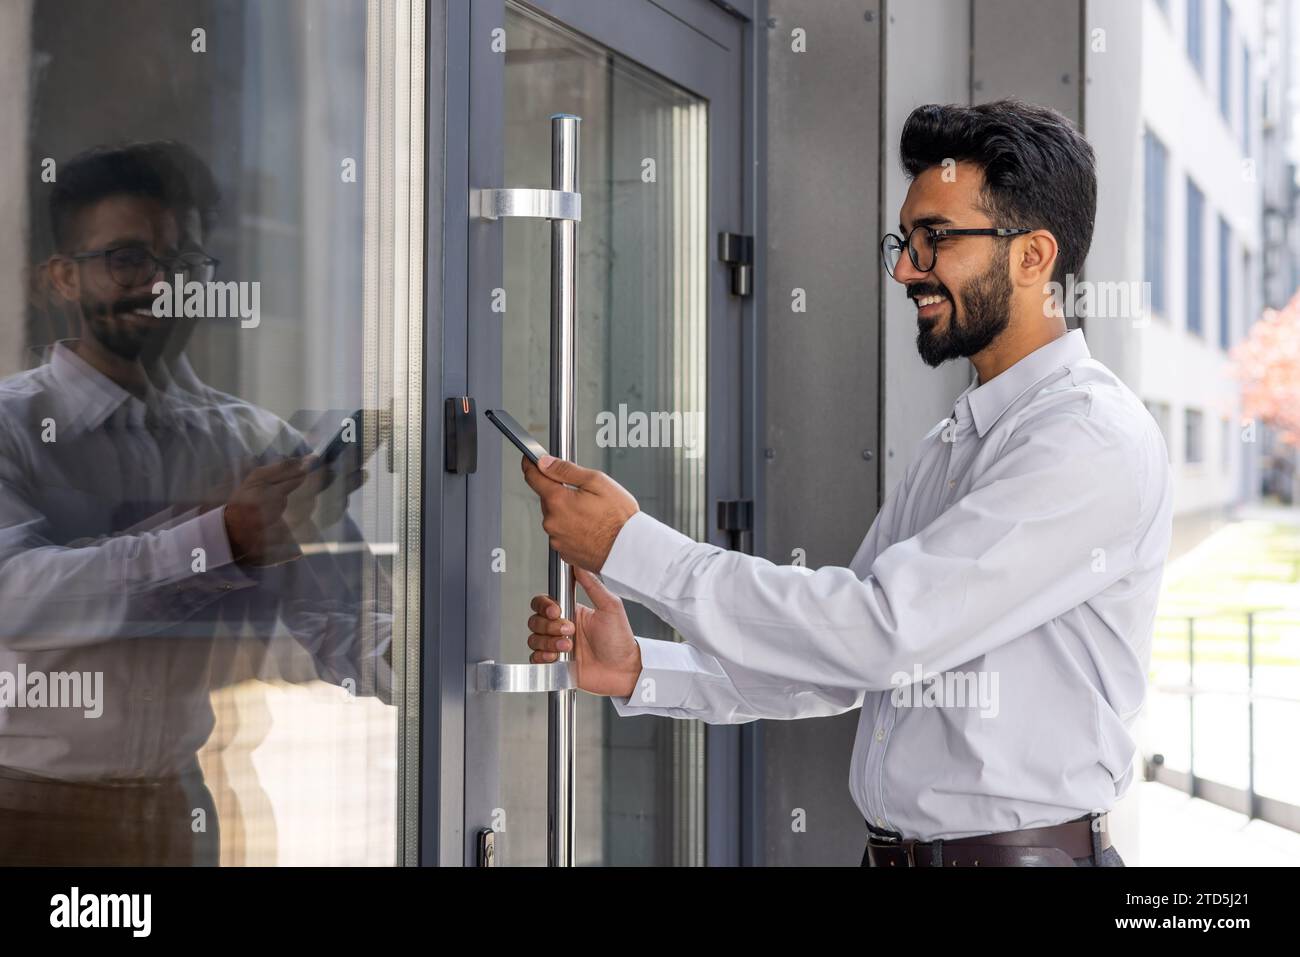 Young businessman using phone to open office door of building, man happy using wireless access, businessman going to work happy smiling. Stock Photo